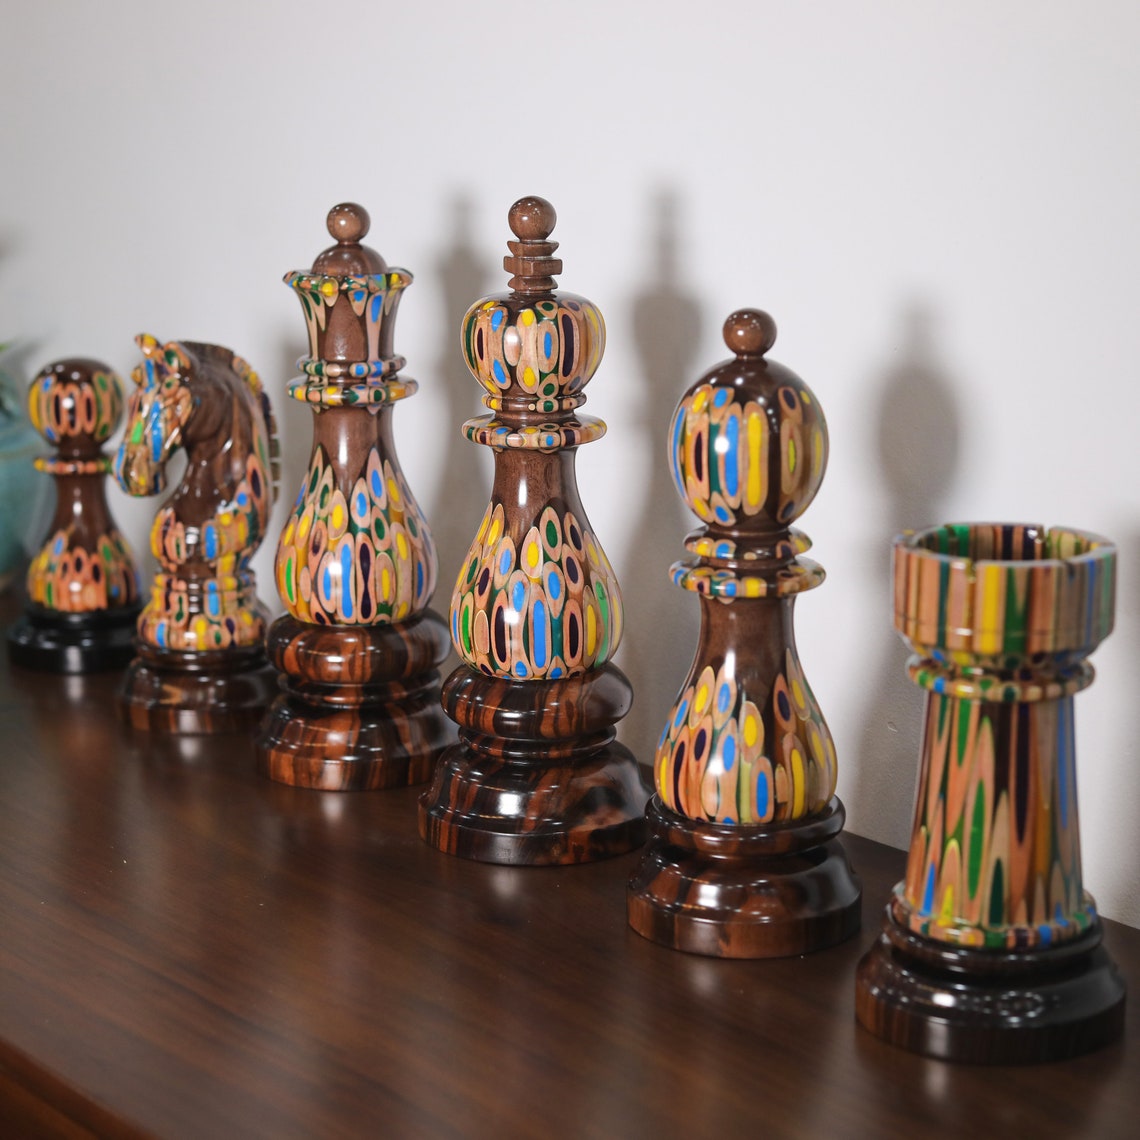 Giant Chess Pieces for decoration